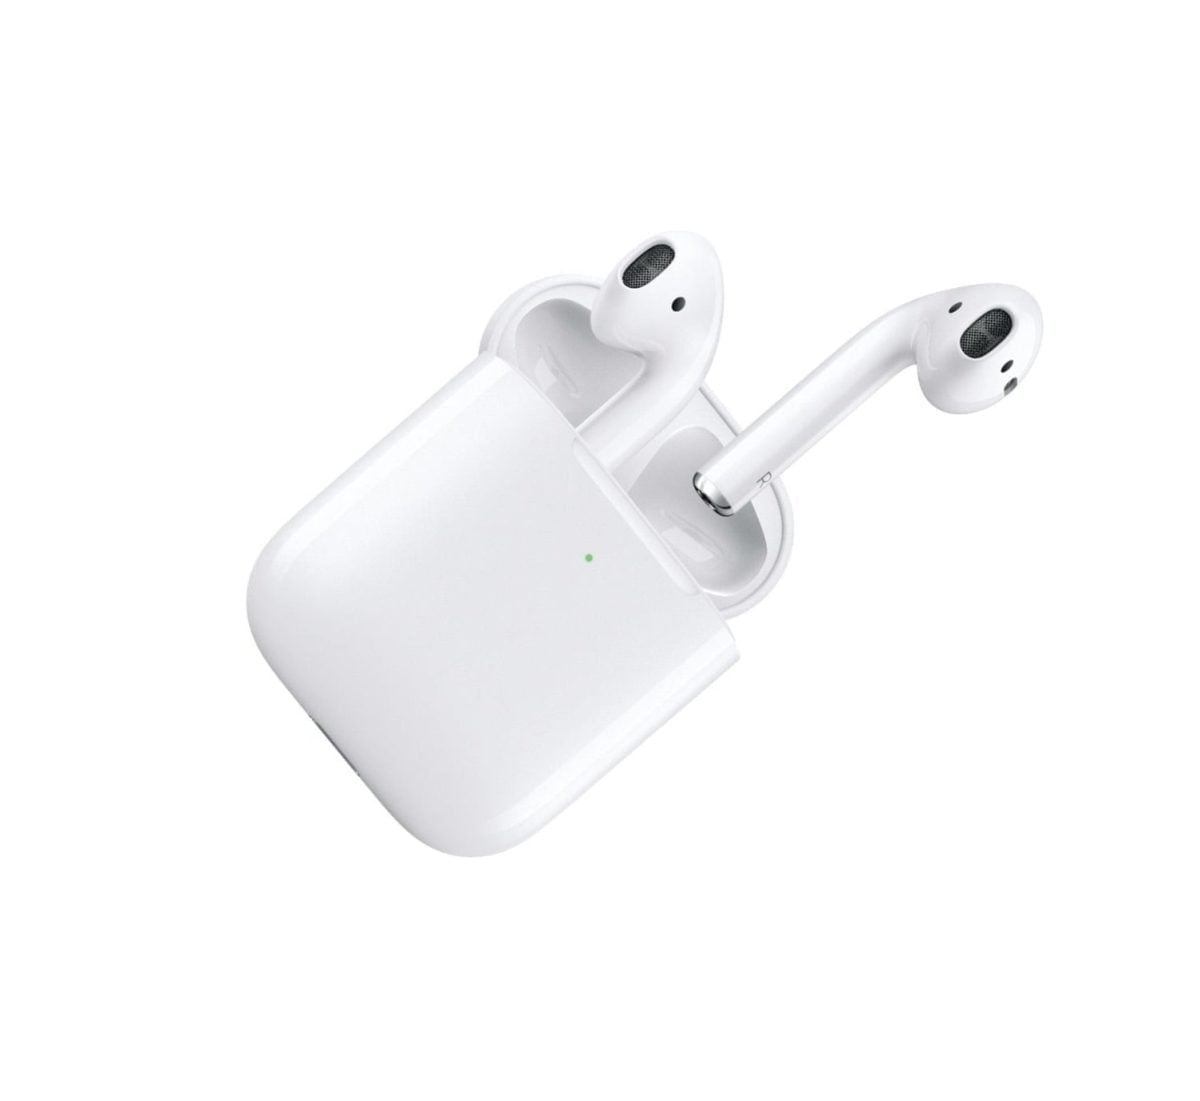 6083595Cv11D Apple &Lt;Div&Gt; &Lt;H1&Gt;Apple Airpods With Wireless Charging Case - White Model Mrxj2Am/A&Lt;/H1&Gt; &Lt;Div&Gt;Airpods Combine Intelligent Design With Breakthrough Technology And Crystal-Clear Sound. Powered By The New Apple H1 Headphone Chip, Airpods Now Feature Hands-Free Access To Siri Using Just Your Voice. And Up To 3 Hours Of Talk Time On A Single Charge.&Lt;/Div&Gt; &Lt;/Div&Gt; &Lt;Div&Gt; &Lt;Div Class=&Quot;List-Row&Quot;&Gt; &Lt;Ul&Gt; &Lt;Li Class=&Quot;Body-Copy&Quot;&Gt;Automatically On, Automatically Connected&Lt;/Li&Gt; &Lt;Li Class=&Quot;Body-Copy&Quot;&Gt;Easy Setup For All Your Apple Devices&Lt;/Li&Gt; &Lt;Li Class=&Quot;Body-Copy&Quot;&Gt;Quick Access To Siri By Saying, Hey Siri&Lt;/Li&Gt; &Lt;Li Class=&Quot;Body-Copy&Quot;&Gt;Double-Tap To Play Or Skip Forward&Lt;/Li&Gt; &Lt;Li Class=&Quot;Body-Copy&Quot;&Gt;New Apple H1 Headphone Chip Delivers A Faster Wireless Connection To Your Devices&Lt;/Li&Gt; &Lt;Li Class=&Quot;Body-Copy&Quot;&Gt;Charges Quickly In The Case&Lt;/Li&Gt; &Lt;Li Class=&Quot;Body-Copy&Quot;&Gt;Case Can Be Charged Using The Lightning Connector&Lt;/Li&Gt; &Lt;Li Class=&Quot;Body-Copy&Quot;&Gt;Rich, High-Quality Audio And Voice&Lt;/Li&Gt; &Lt;Li Class=&Quot;Body-Copy&Quot;&Gt;Seamless Switching Between Devices&Lt;/Li&Gt; &Lt;Li Class=&Quot;Body-Copy&Quot;&Gt;Listen And Talk All Day With Multiple Charges From The Charging Case&Lt;/Li&Gt; &Lt;/Ul&Gt; &Lt;/Div&Gt; &Lt;Div Class=&Quot;List-Row&Quot;&Gt;&Lt;/Div&Gt; &Lt;Div Class=&Quot;List-Row&Quot;&Gt; &Lt;P Class=&Quot;Body-Copy&Quot;&Gt;&Lt;Span Style=&Quot;Font-Family: Consolas, Monaco, Monospace&Quot;&Gt;One Year Apple Warranty&Lt;/Span&Gt;&Lt;/P&Gt; &Lt;/Div&Gt; &Lt;/Div&Gt; Apple Airpods Apple Airpods With Wireless Charging Case - White Model Mrxj2Am/A